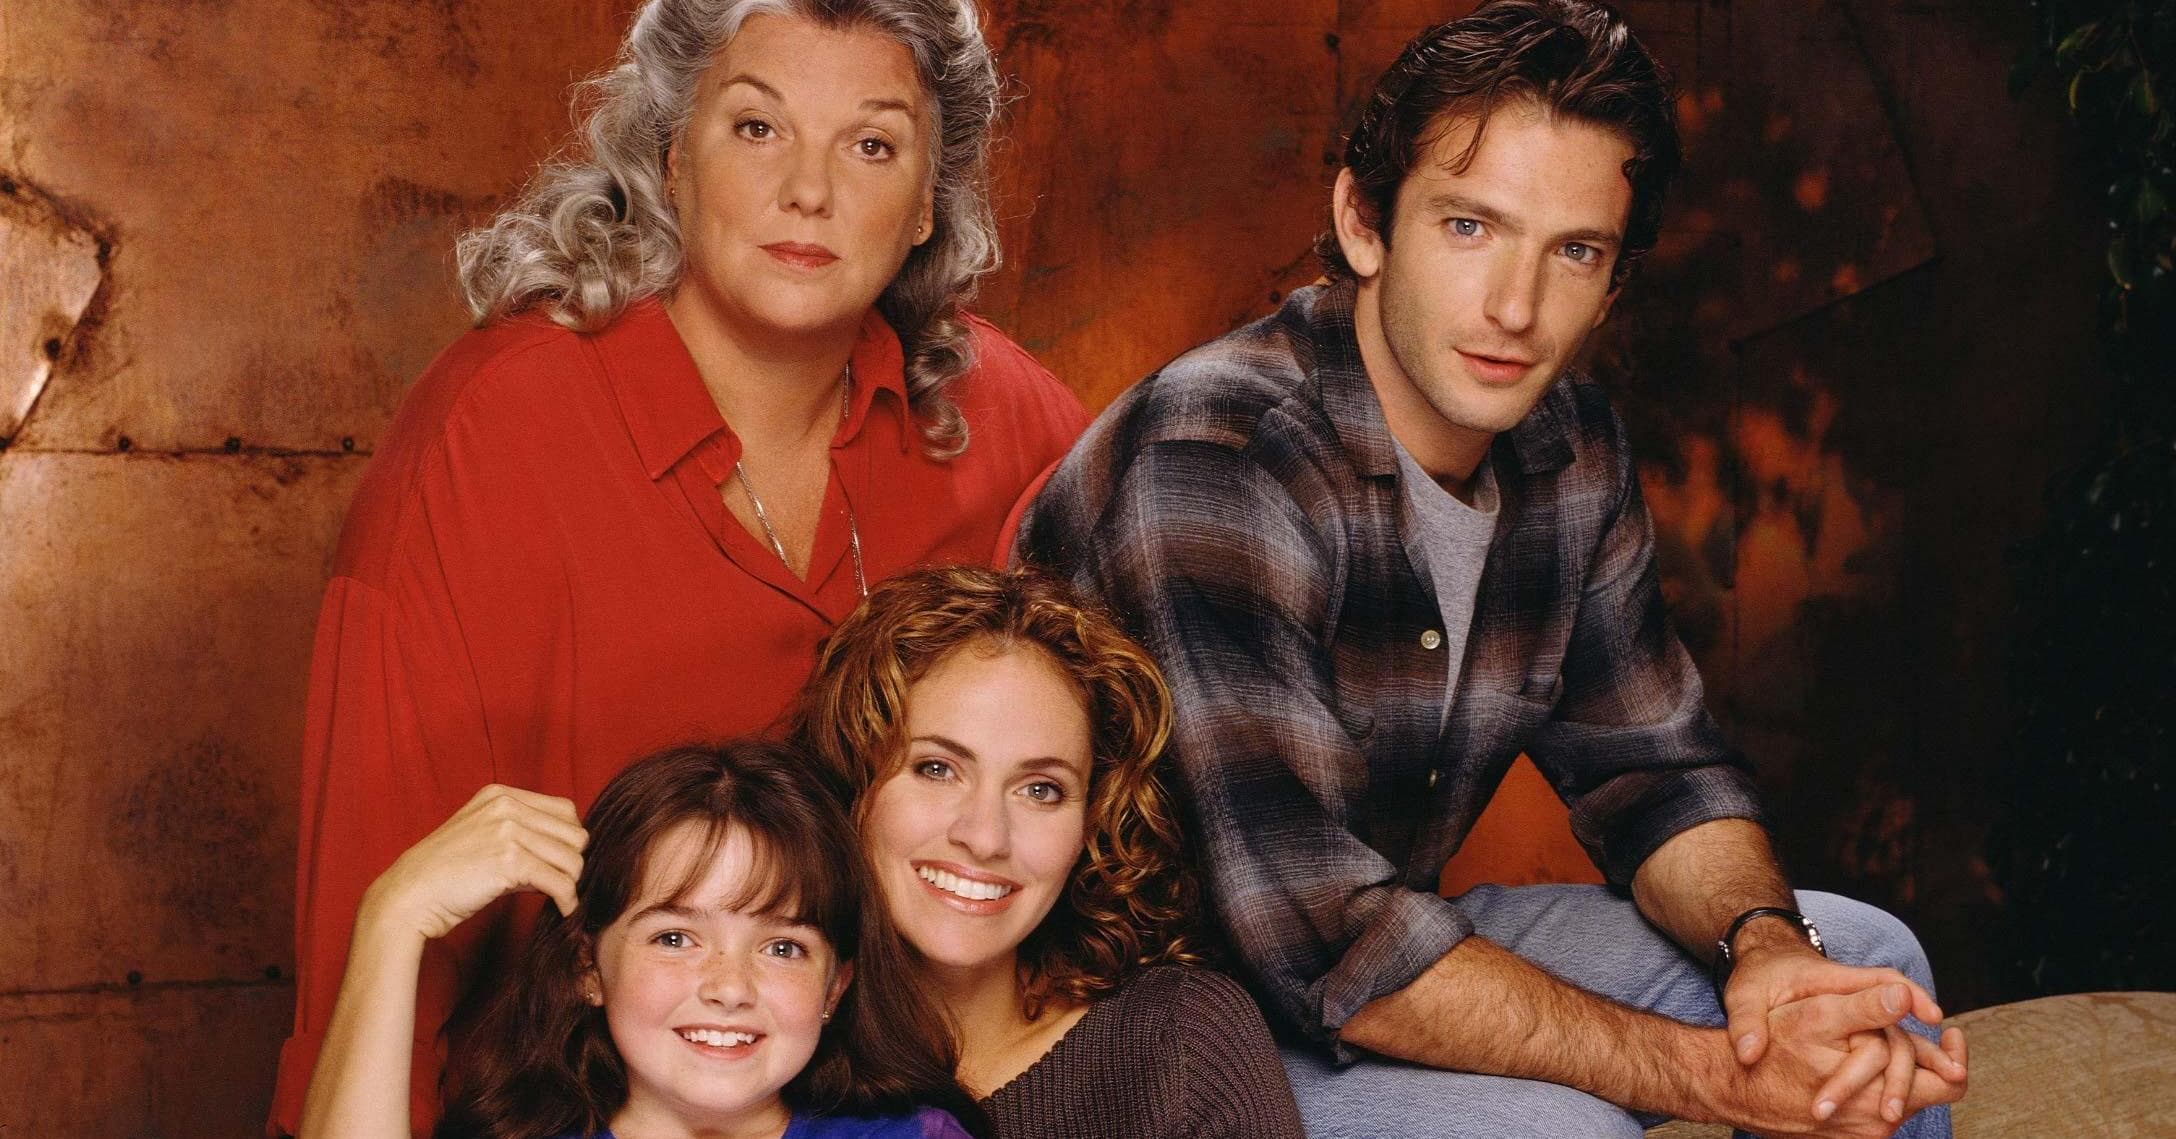 All Judging Amy Episodes | List of Judging Amy Episodes (138 Items)